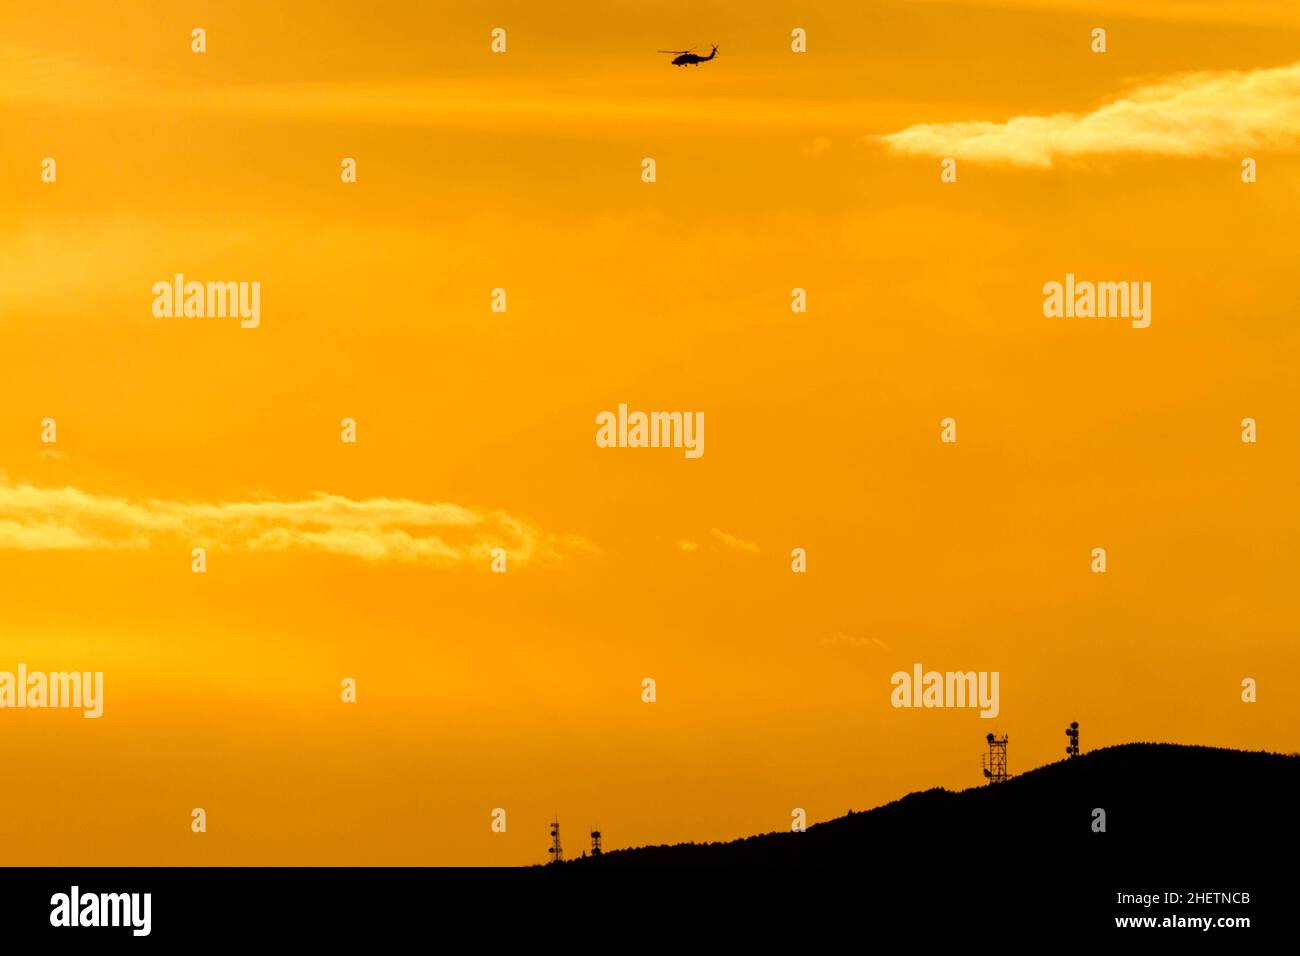 A Sikorsky SH-60 Seahawk helicopter in silhouette at sunset, flying near Naval Air Facility, Atsugi airbase in Kanagawa, Japan. Stock Photo